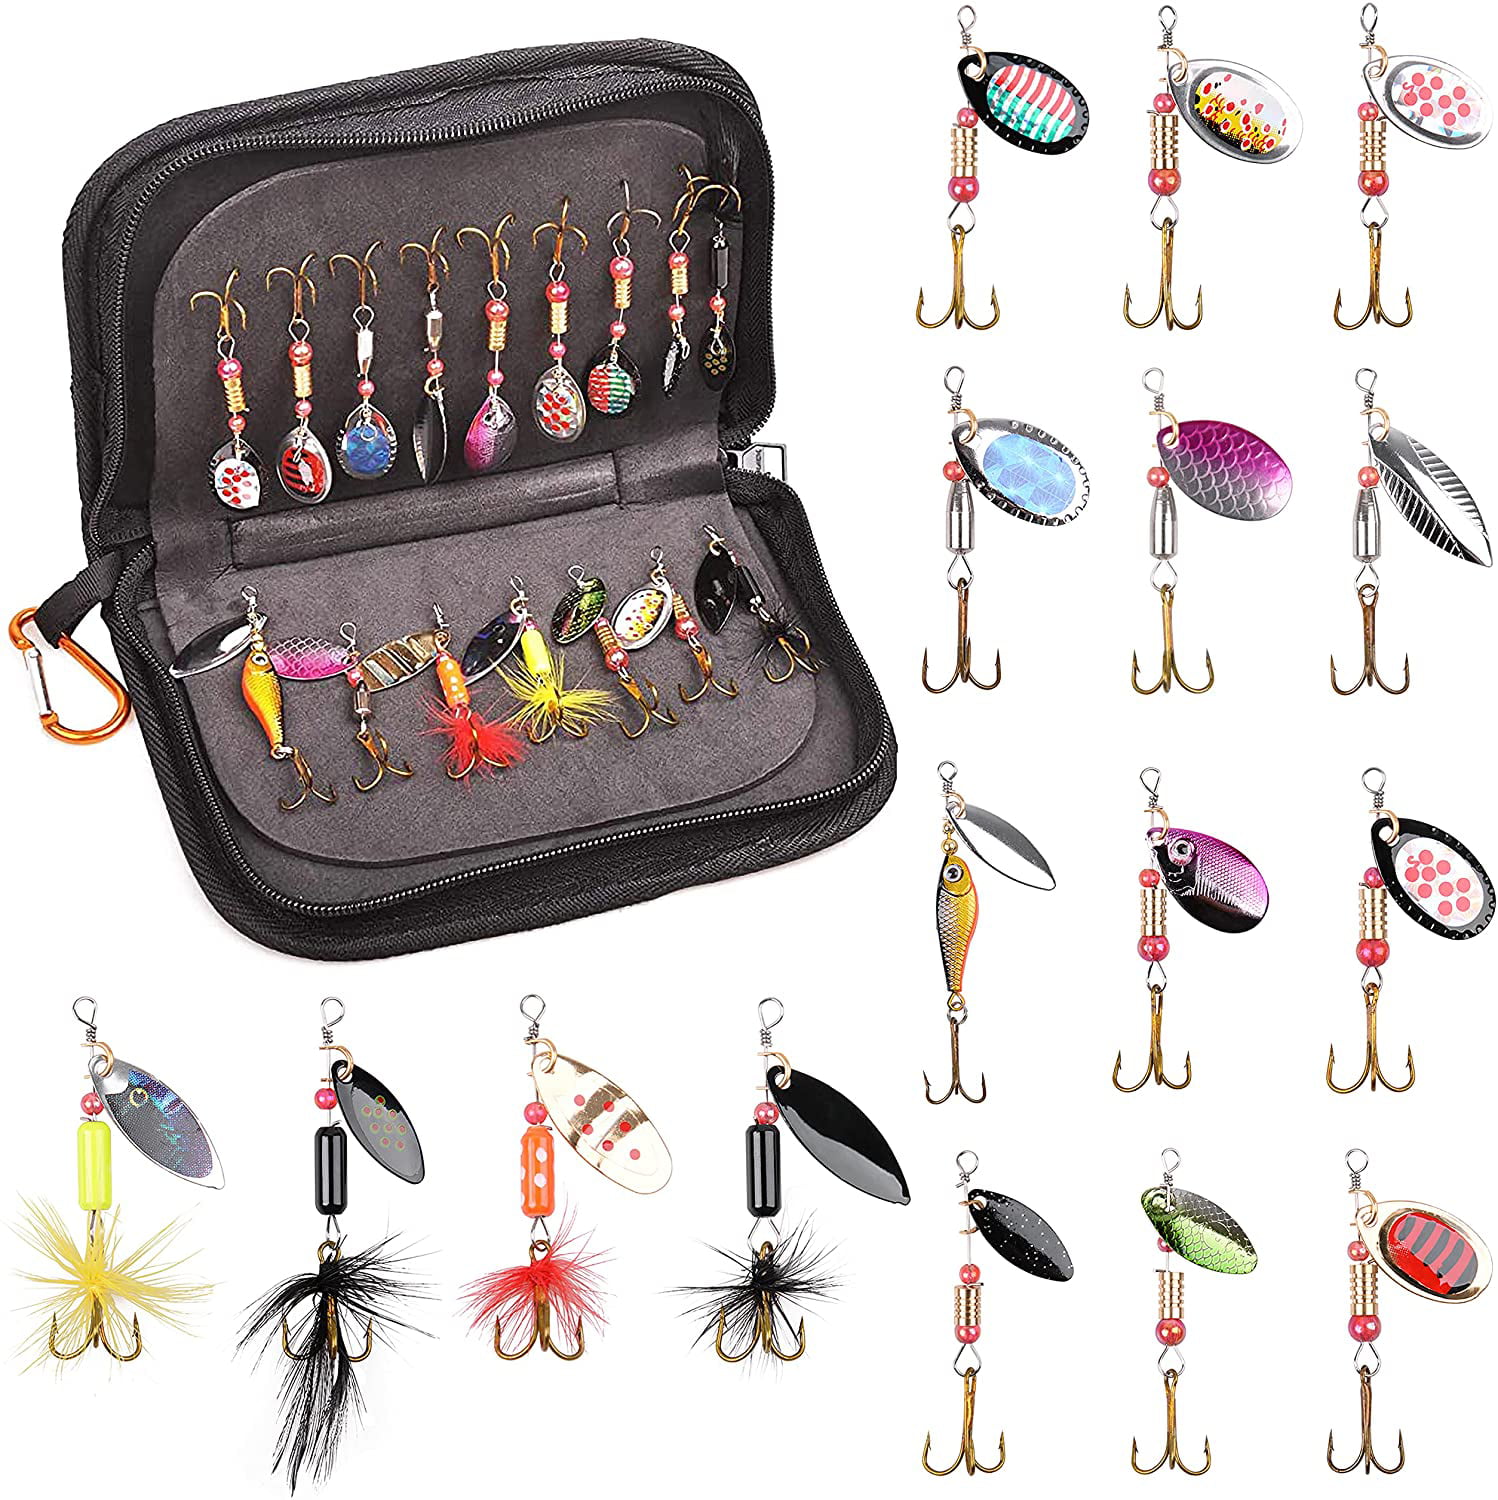 Premium Quality Fishing Spinner Kit with 20PCS Spinnerbaits and Portable  Carry Bag